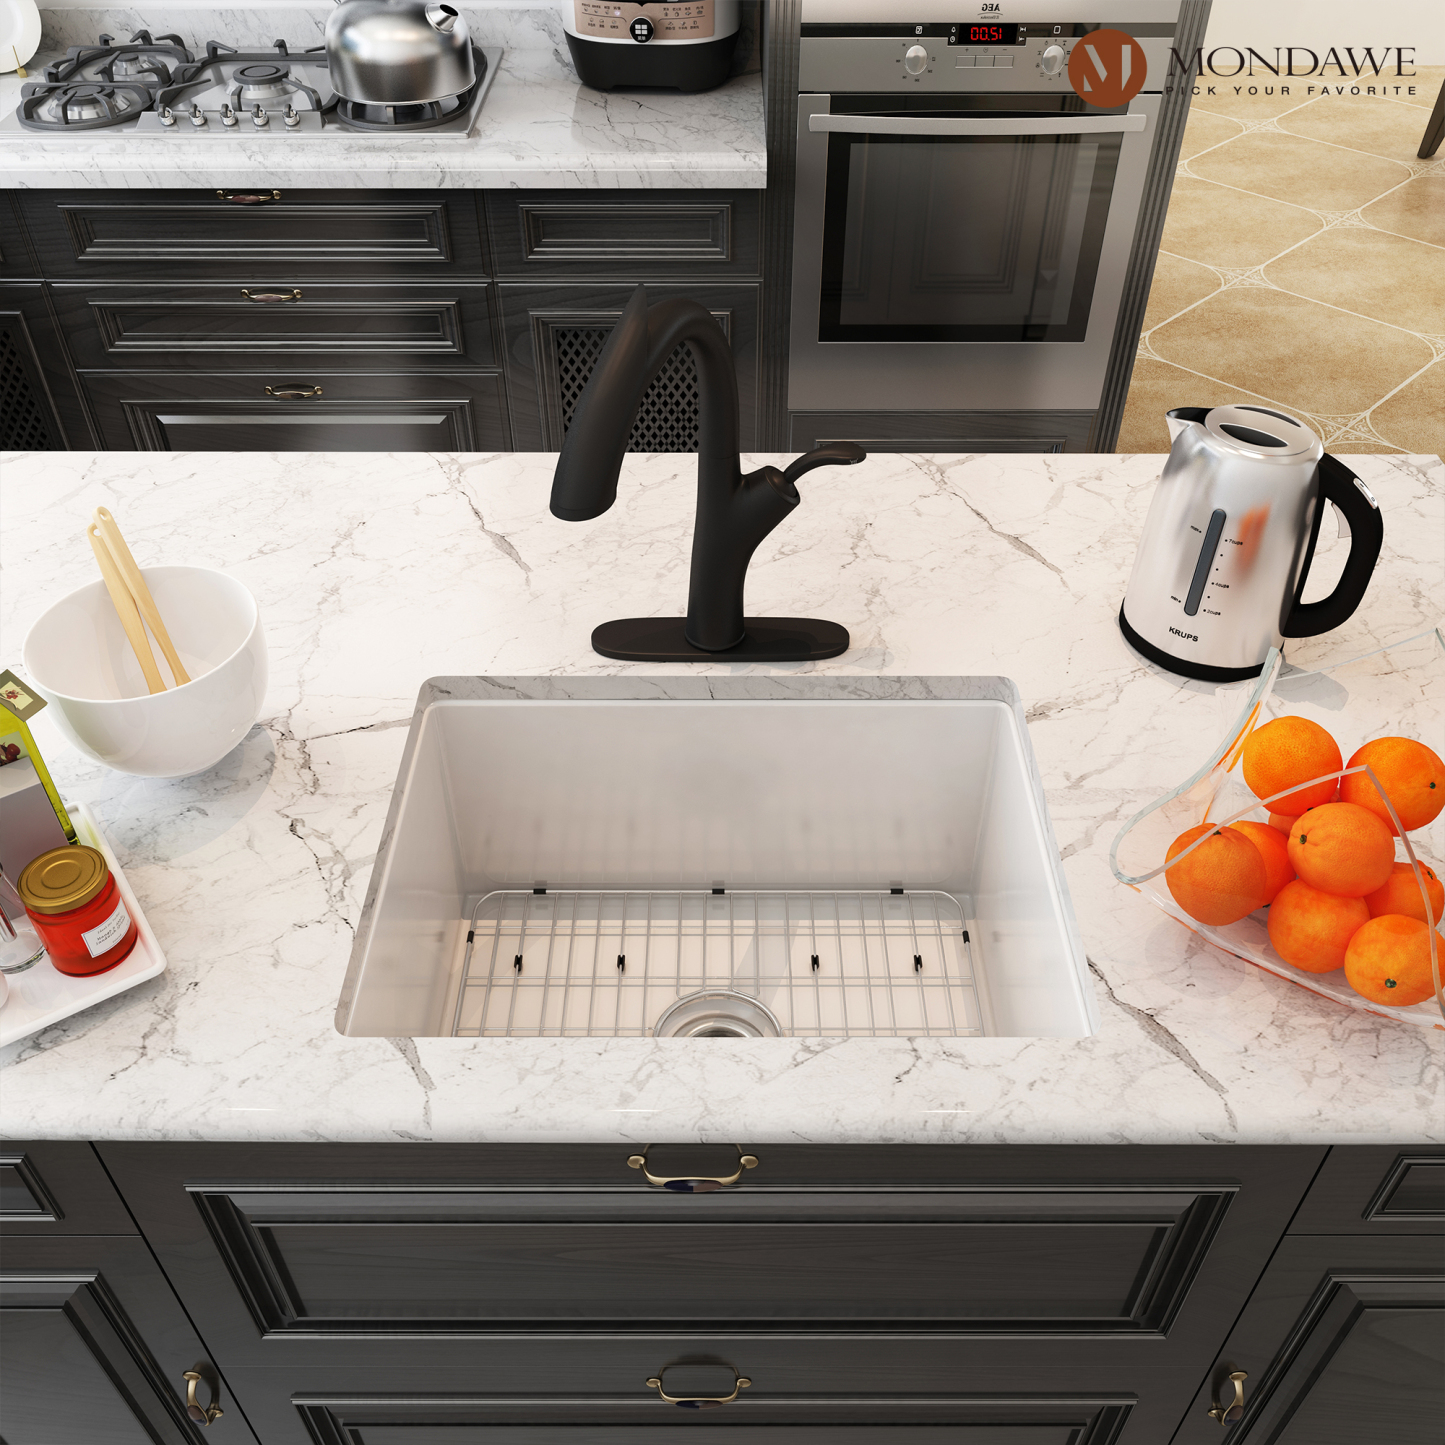 24 Jnch Undermount Single Bowl Fireclay Kitchen Sink In White Comes With Pull Down Kitchen Faucet-Mondawe